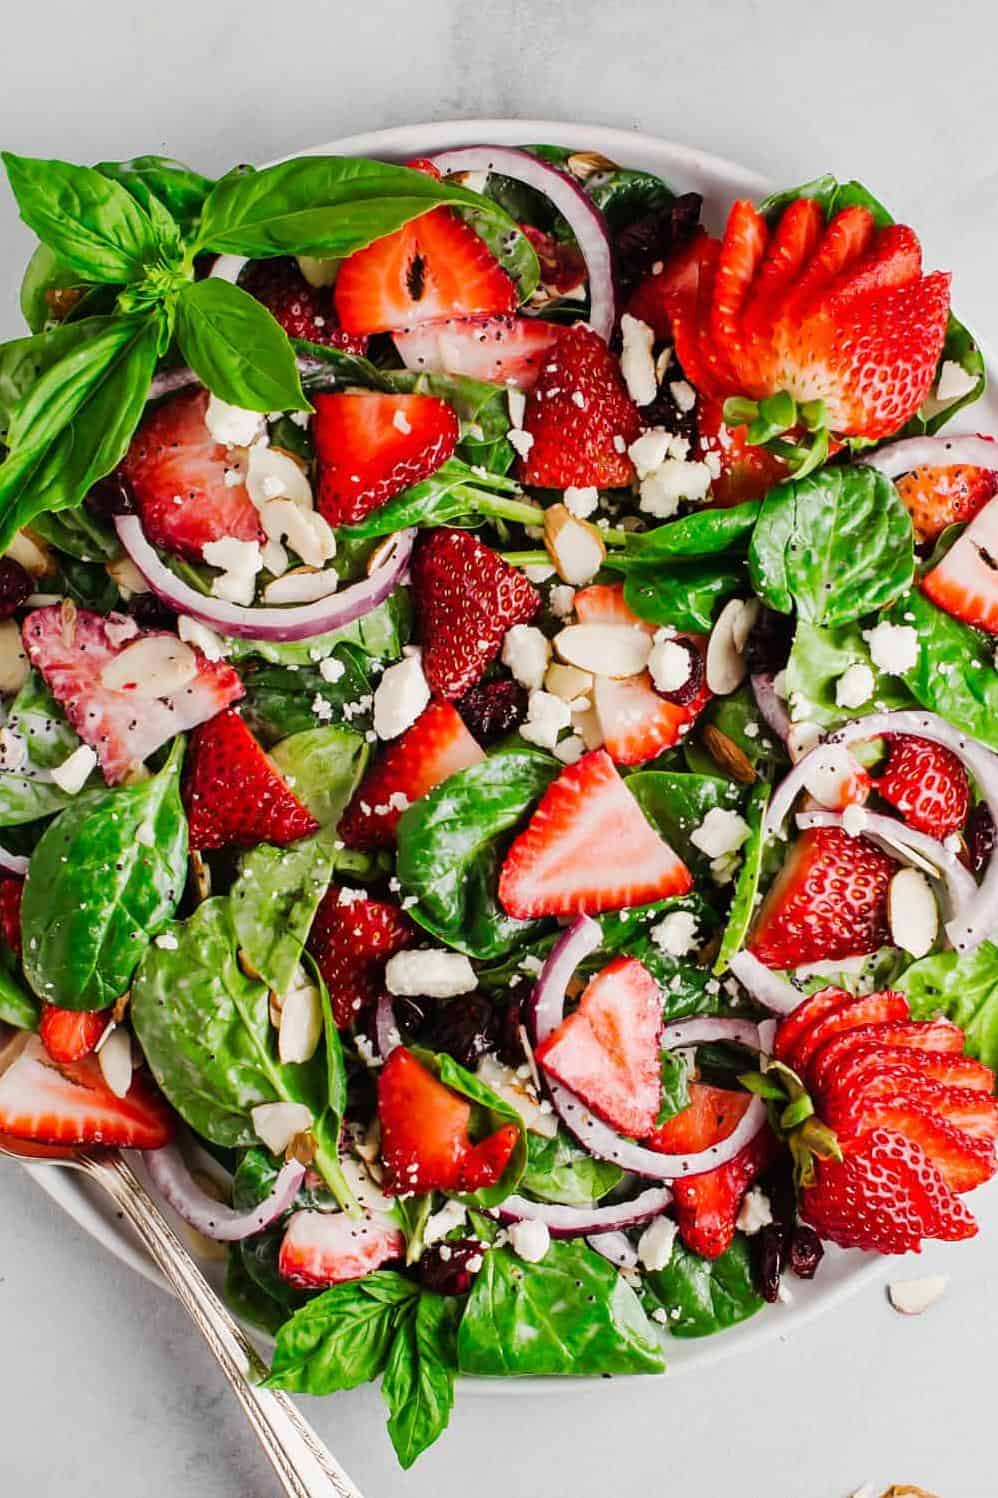  The vibrant colors of this salad will brighten up any table.